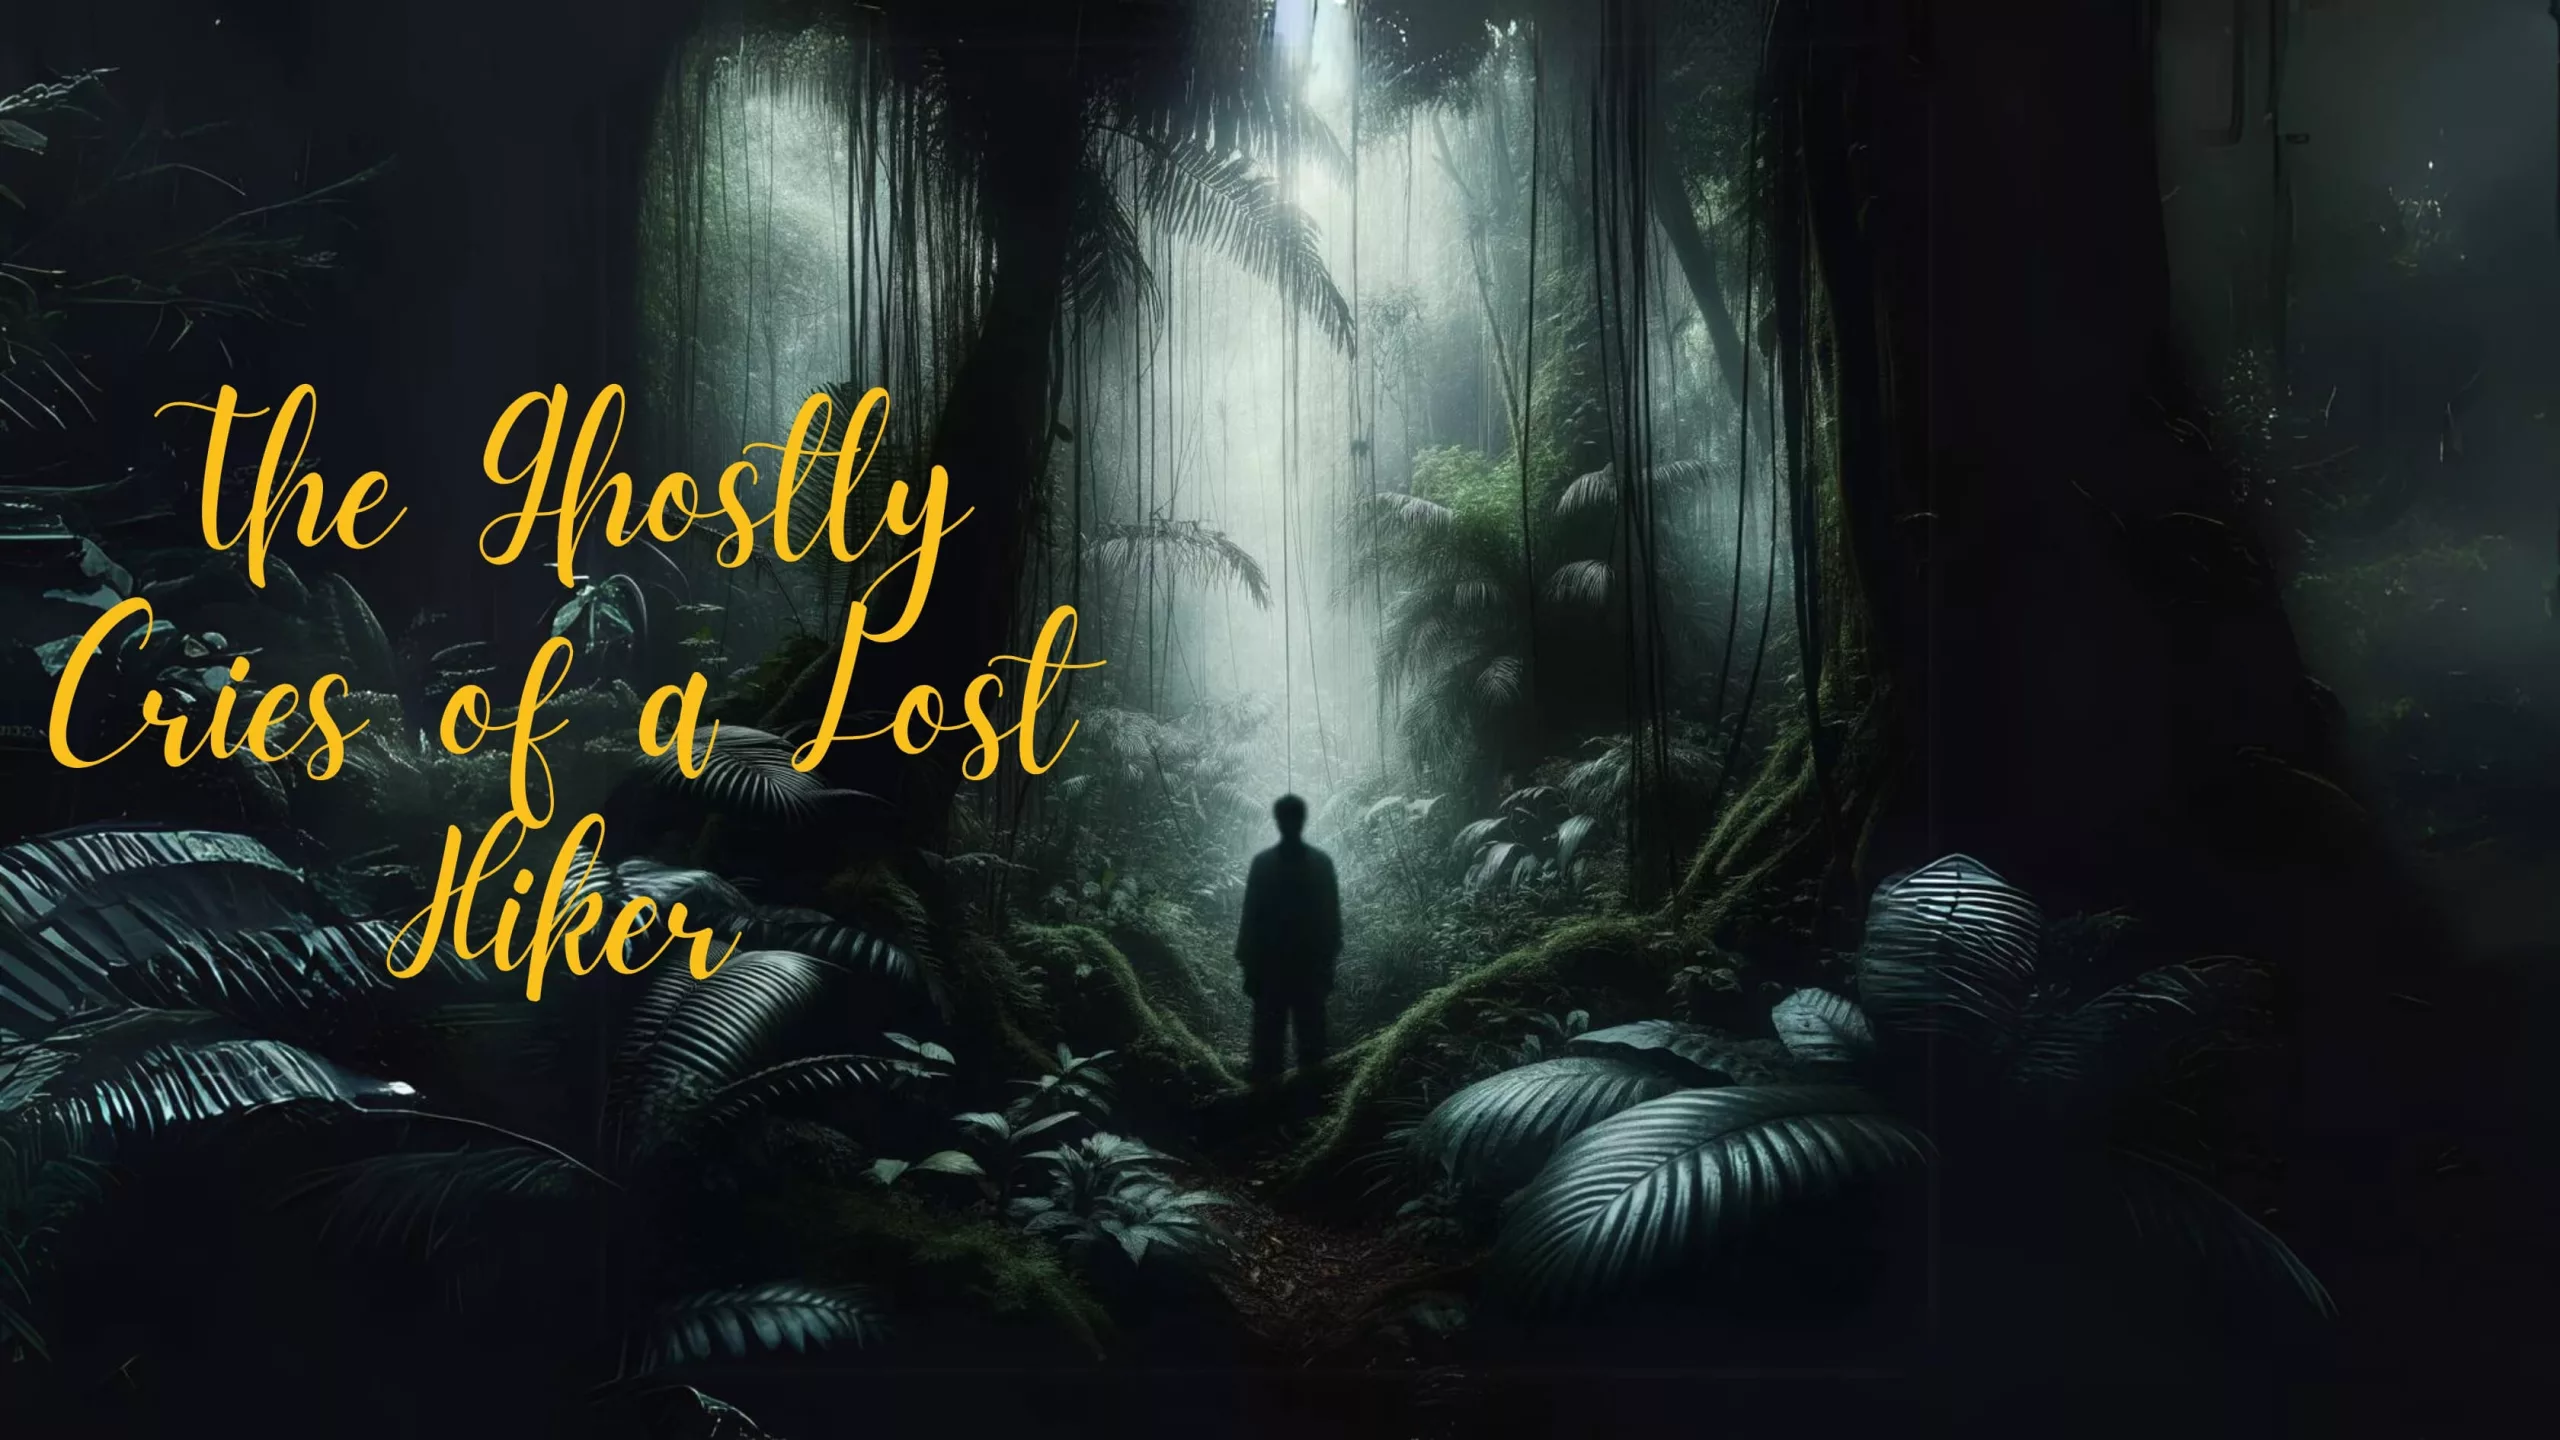 Myth 5: The Ghostly Cries of a Lost Hiker